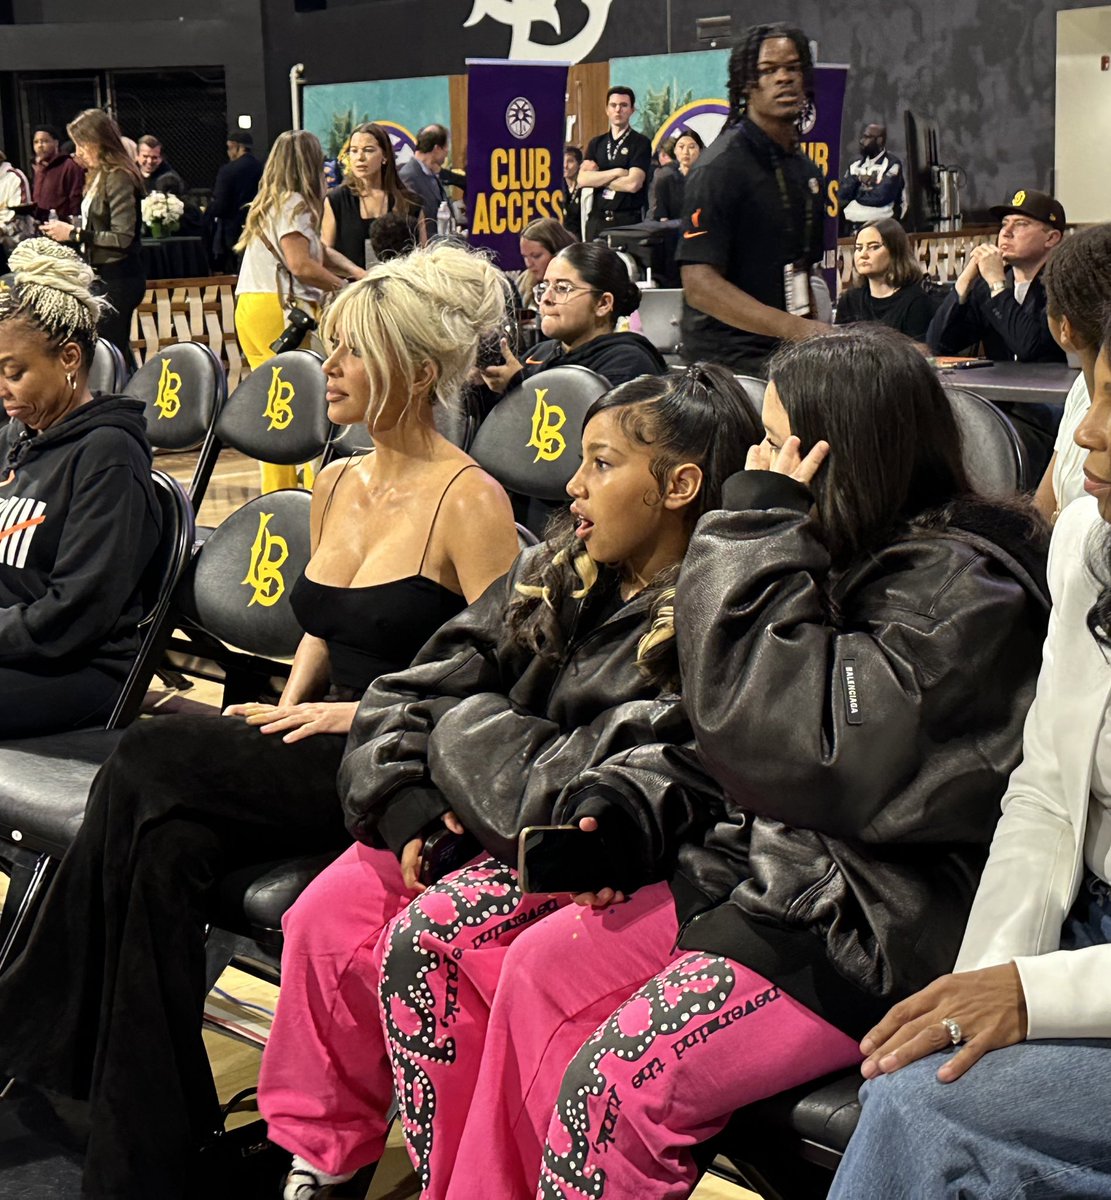 KIM KARDASHIAN AND NORTH ARE AT A SPARKS GAME 🔥‼️🚨